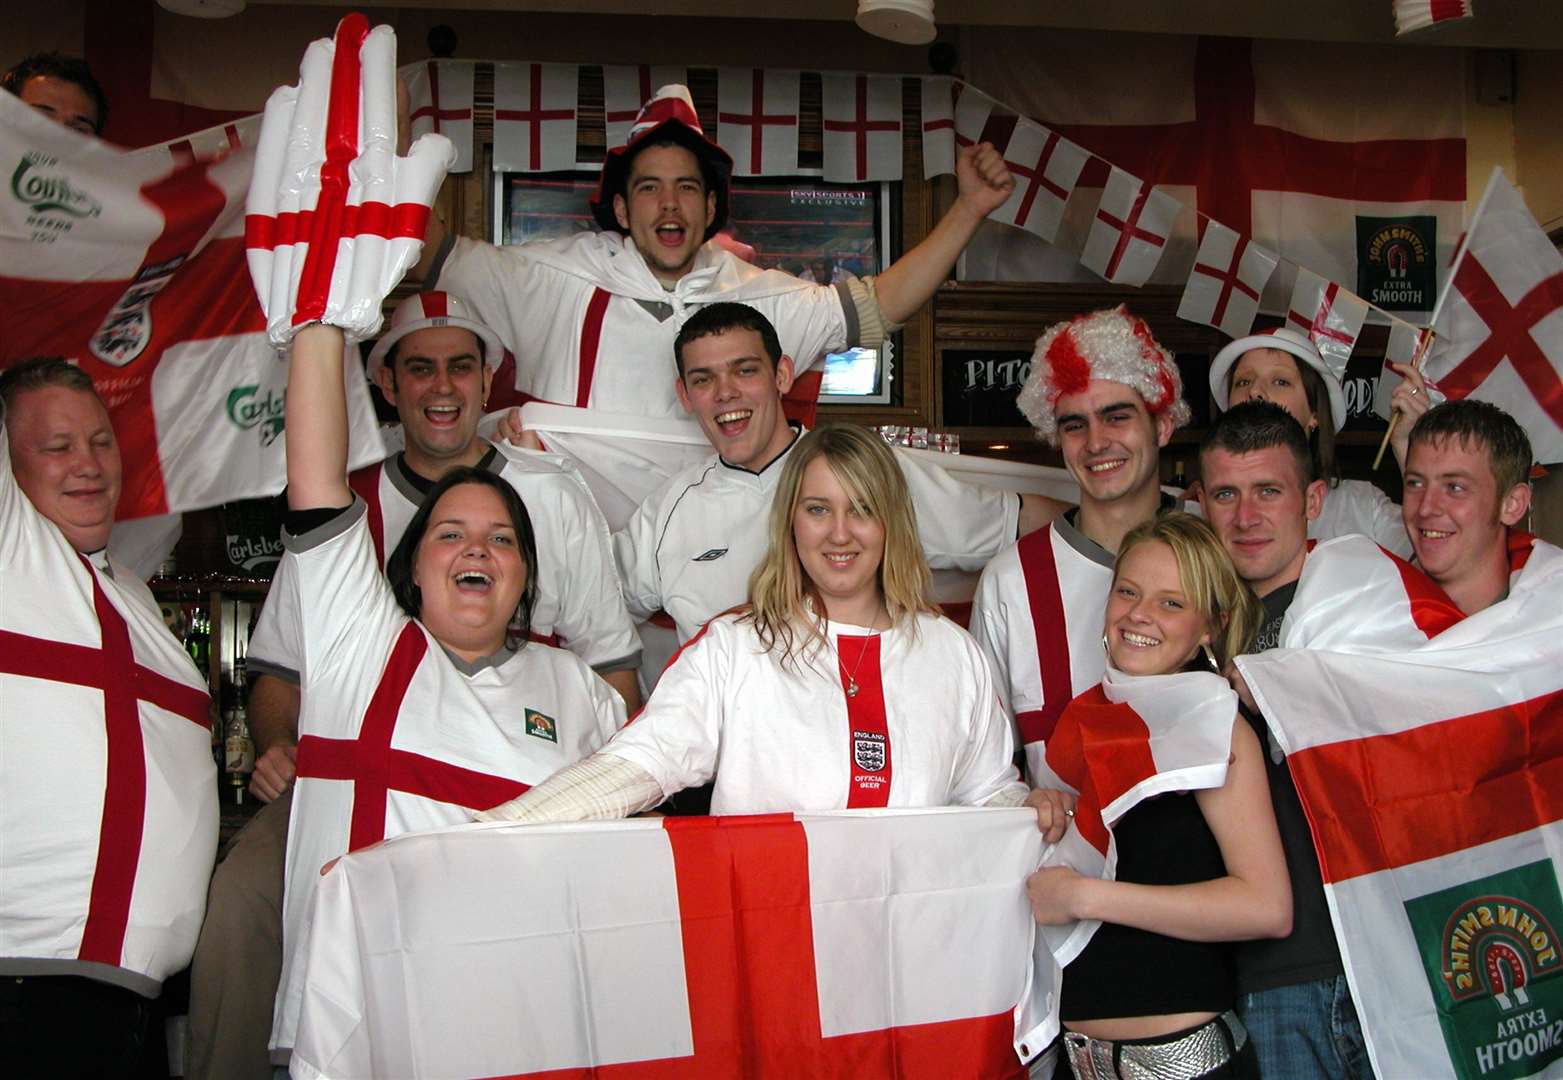 Staff and drinkers at The Ashes, Maidstone, succumb to World Cup fever in June 2006. England were infamously knocked out by Germany. The Ashes is still going strong today